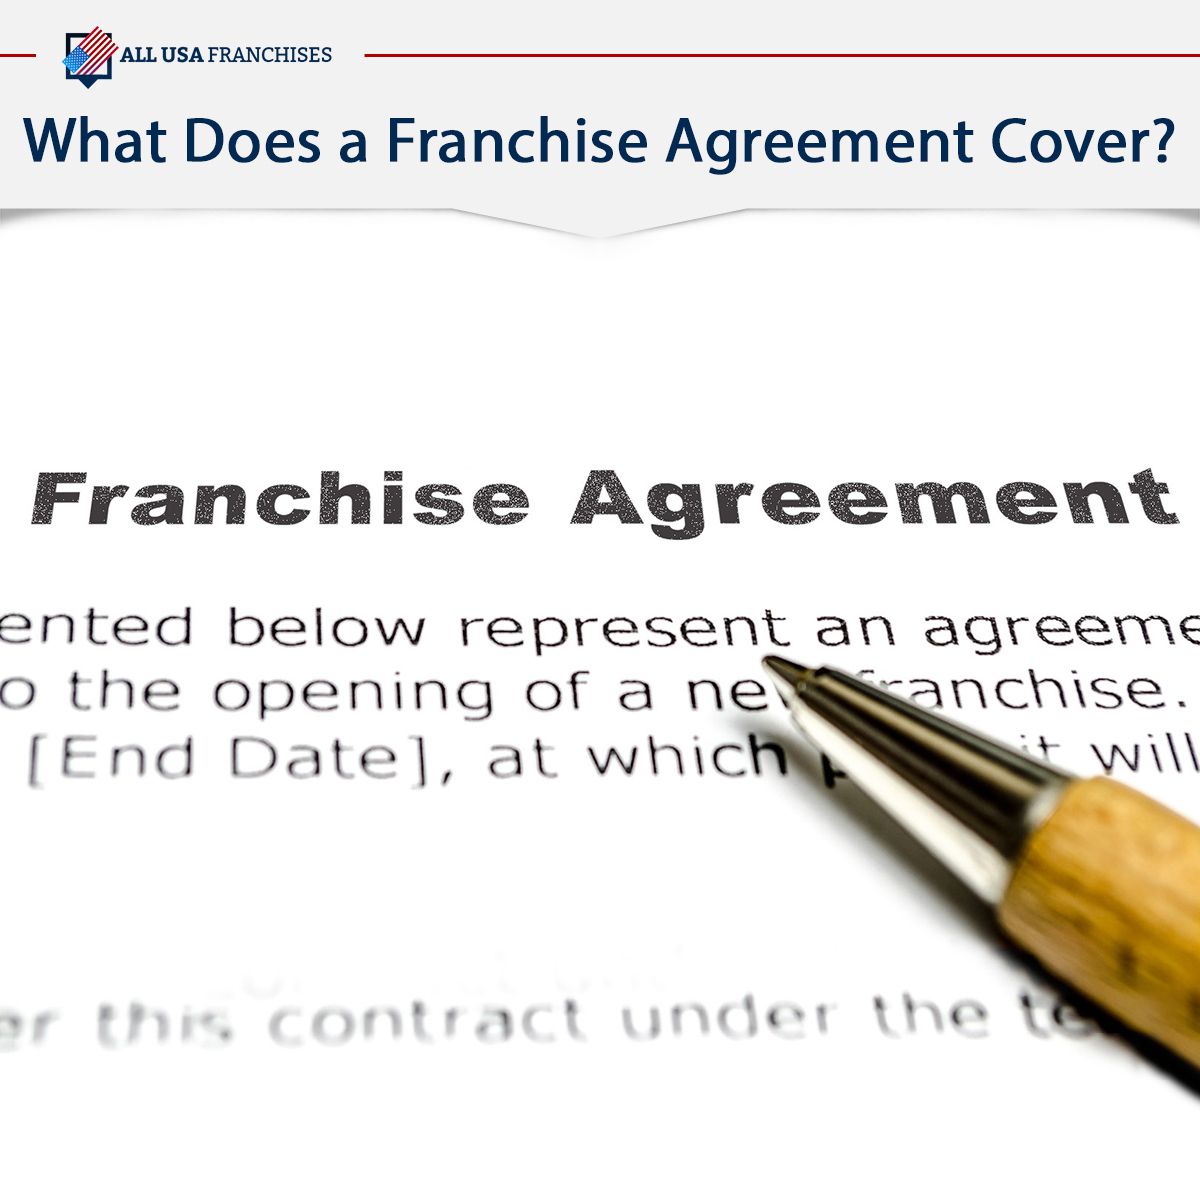 What Does a Franchise Agreement Cover?